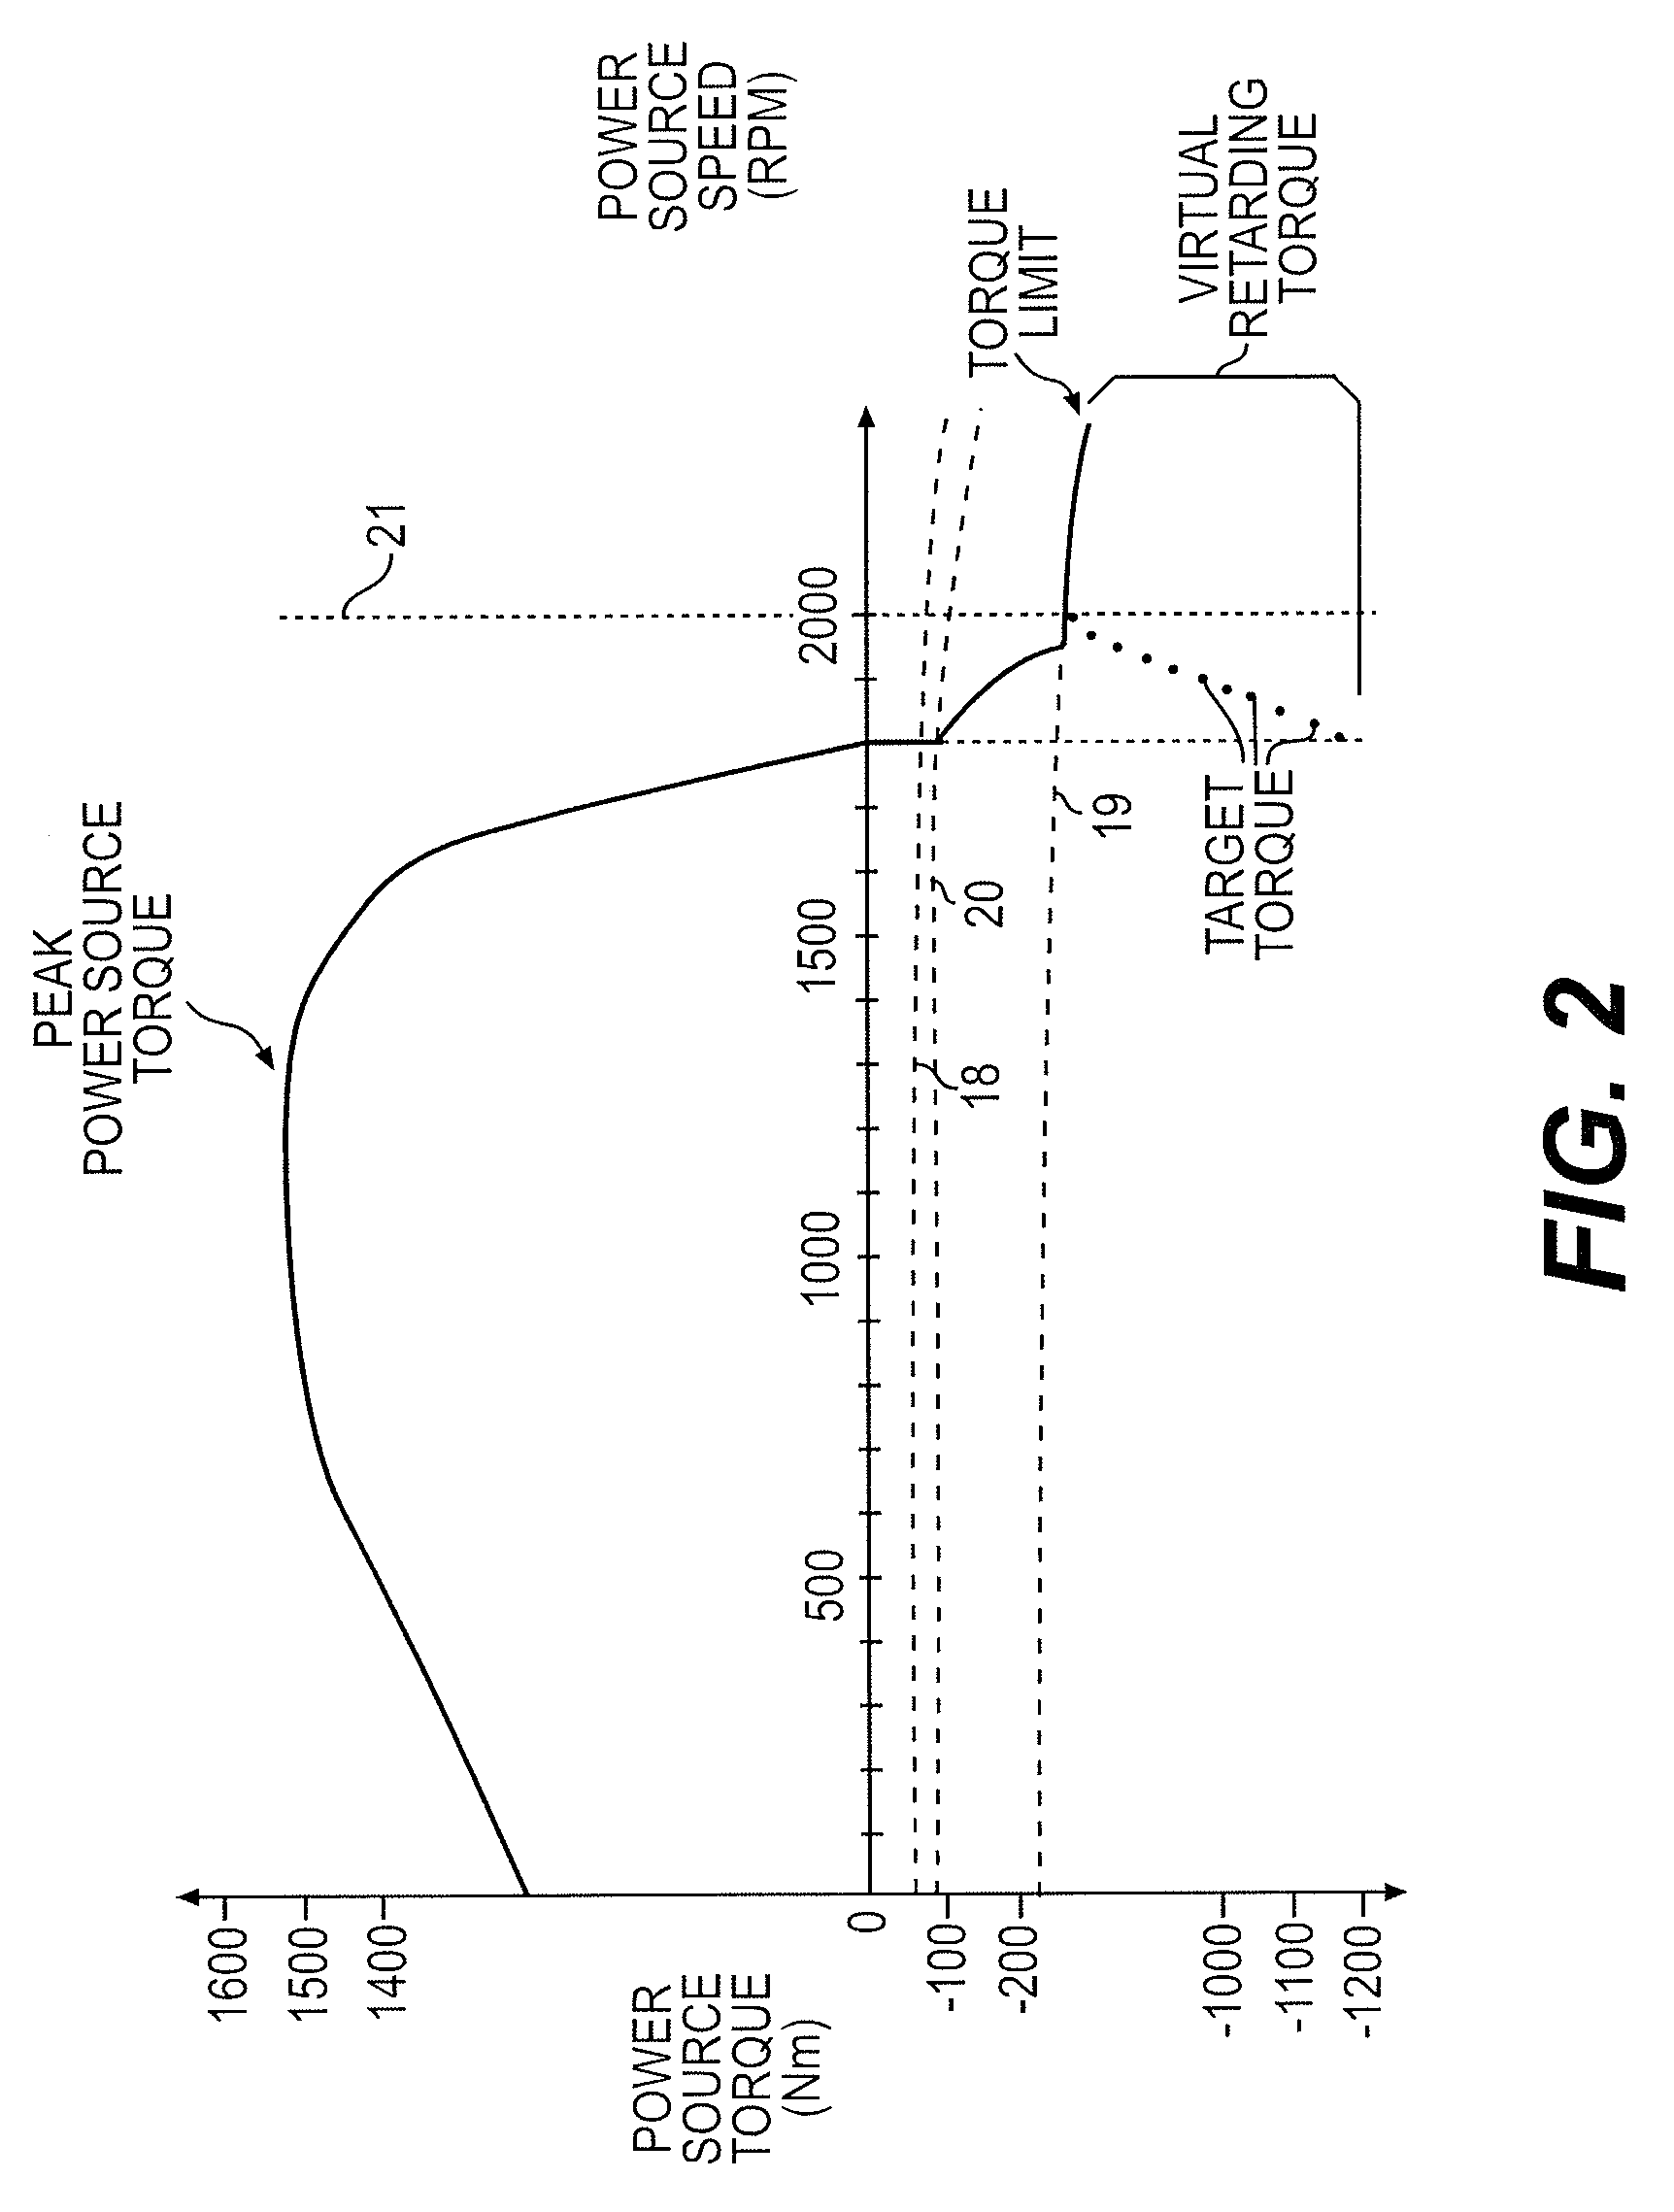 Adaptive power source control system